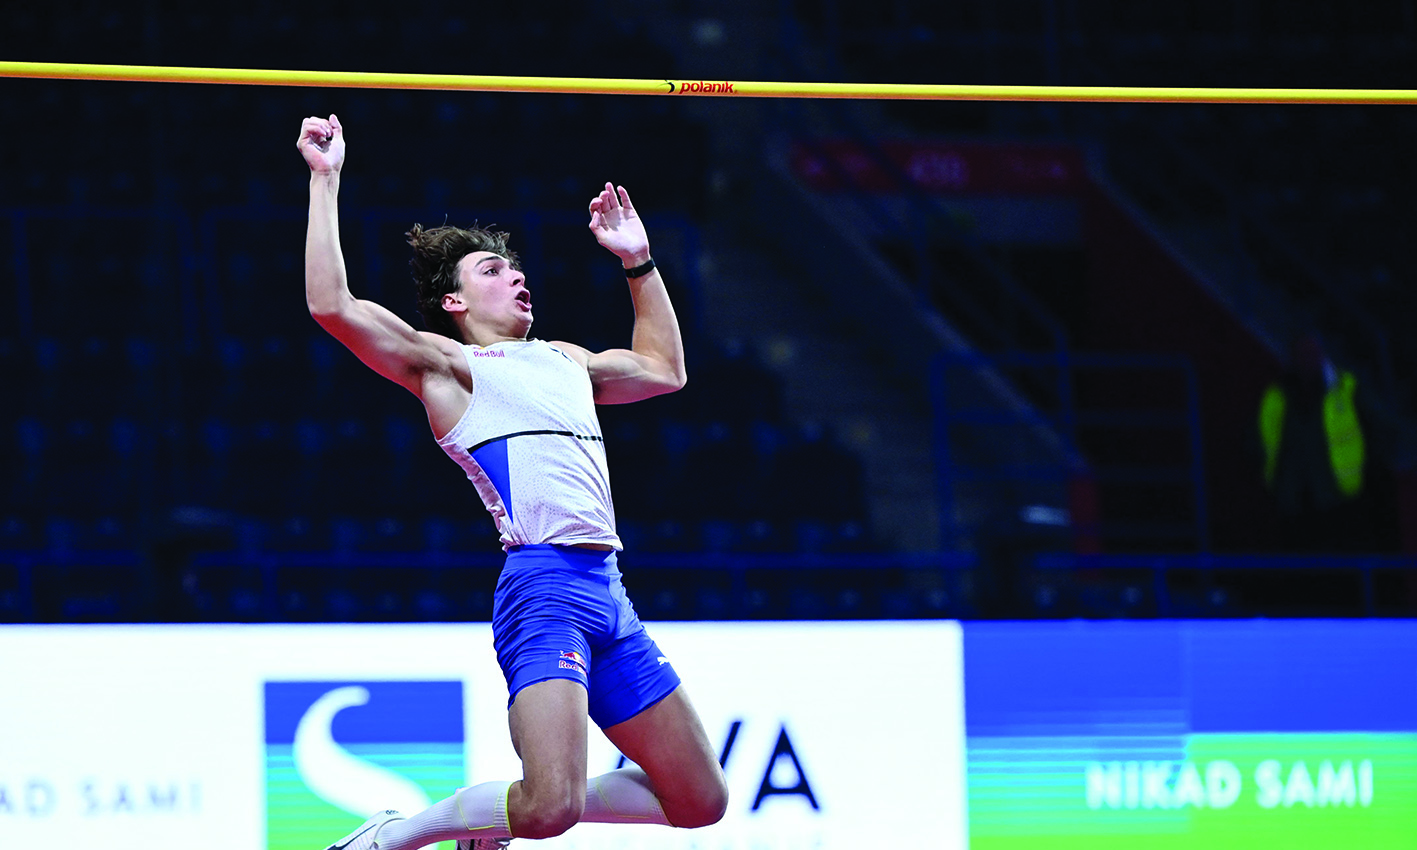 BELGRADE: Sweden's Armand Duplantis clears a pole and breaks his own pole vaulting world record at the World Athletics Indoor Tour Silver meeting in Belgrade on March 7, 2022. - AFPn